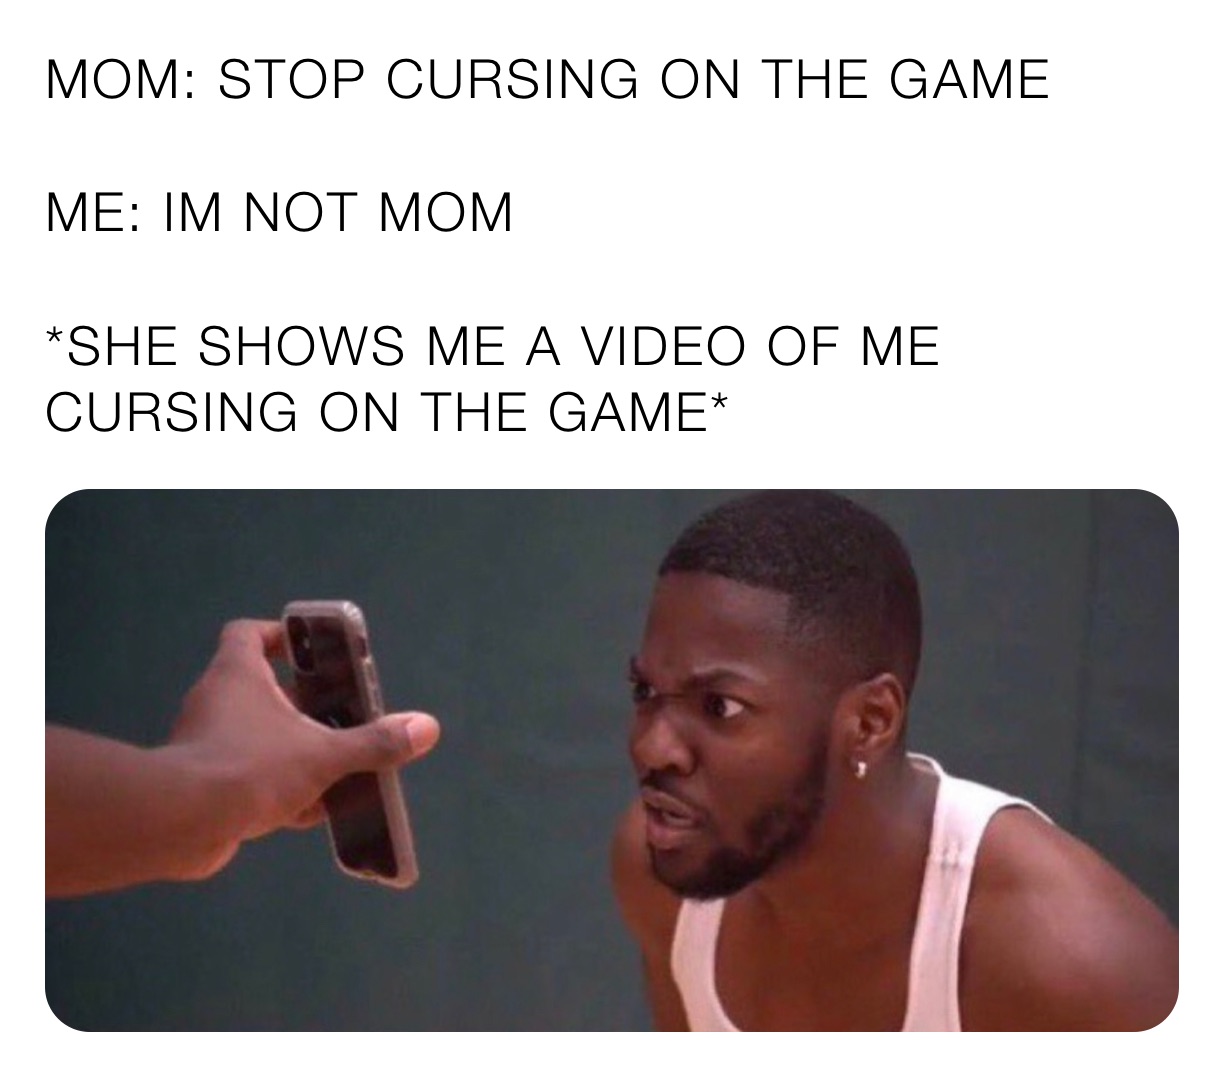 MOM: STOP CURSING ON THE GAME

ME: IM NOT MOM

*SHE SHOWS ME A VIDEO OF ME CURSING ON THE GAME*